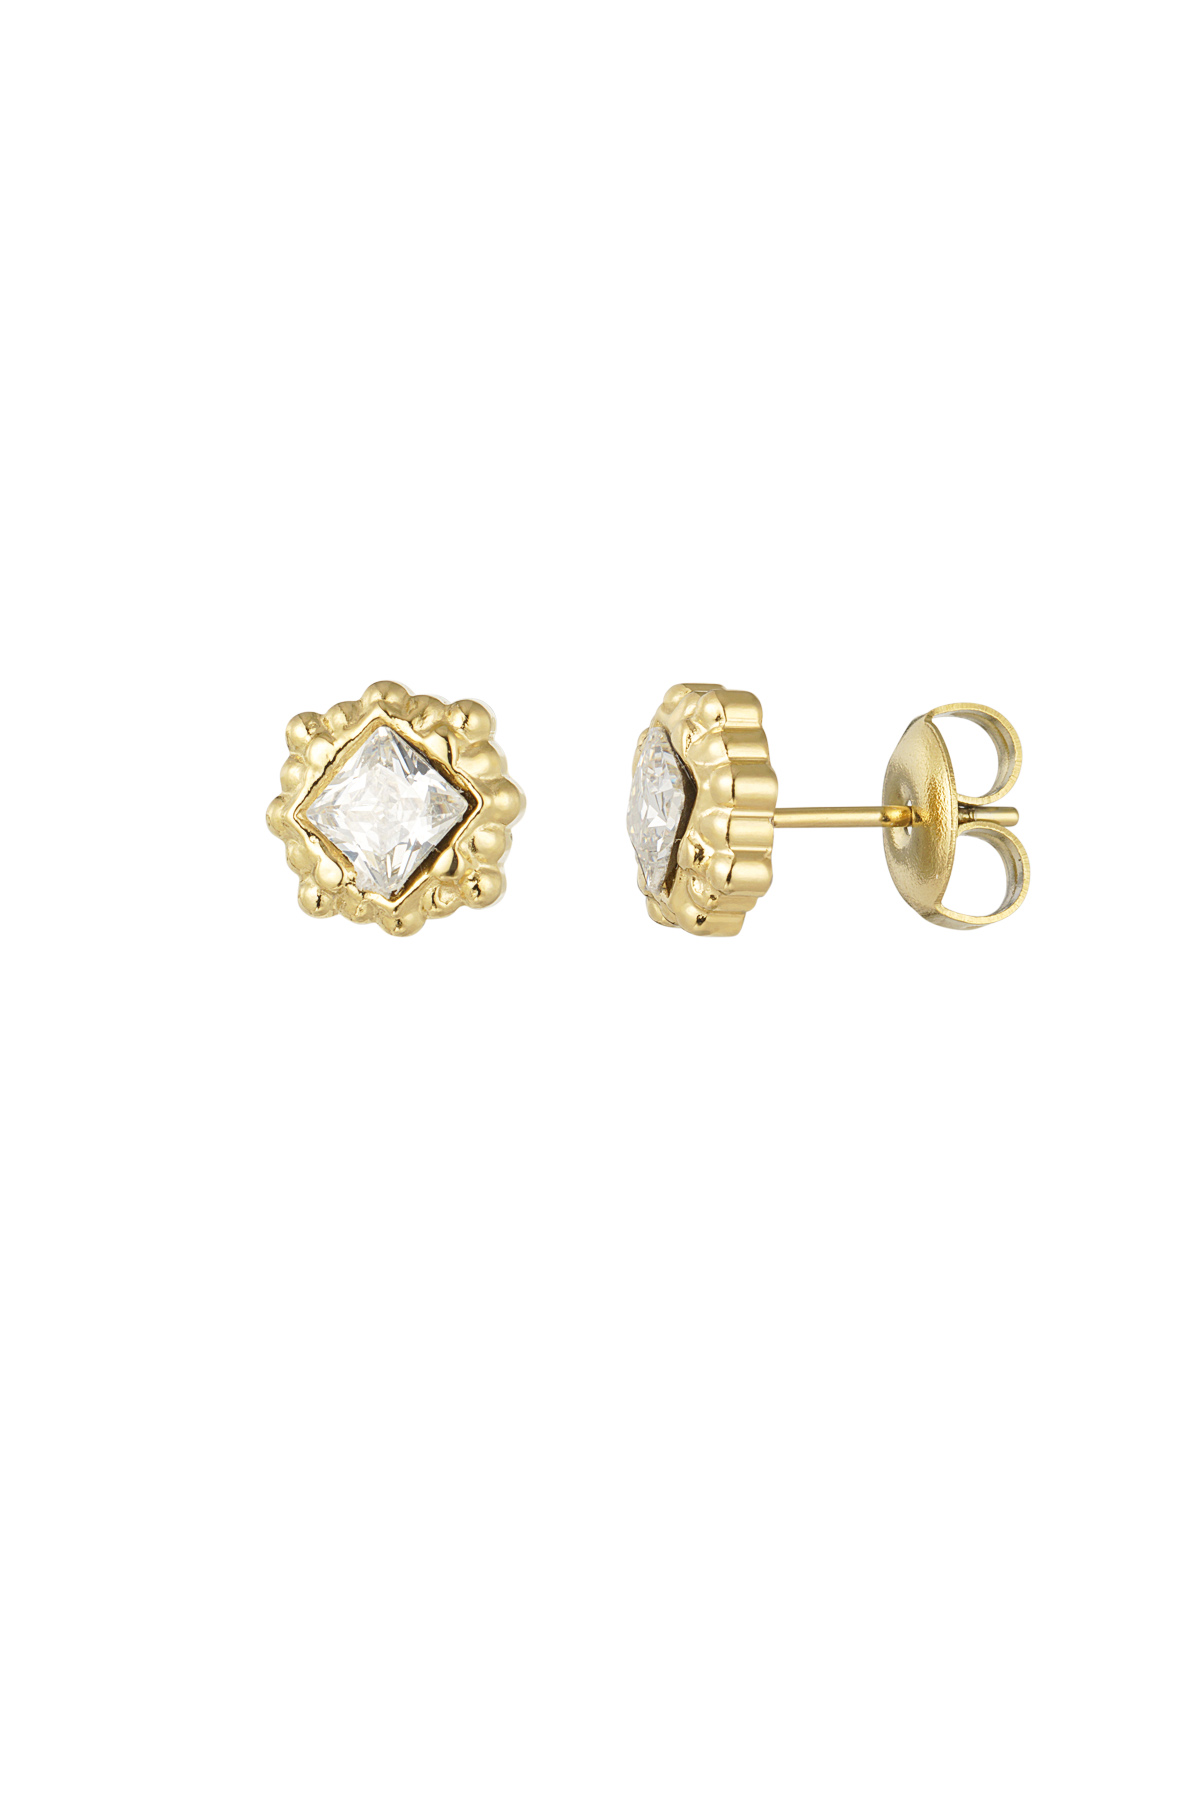 Structured and diamond studs - gold 